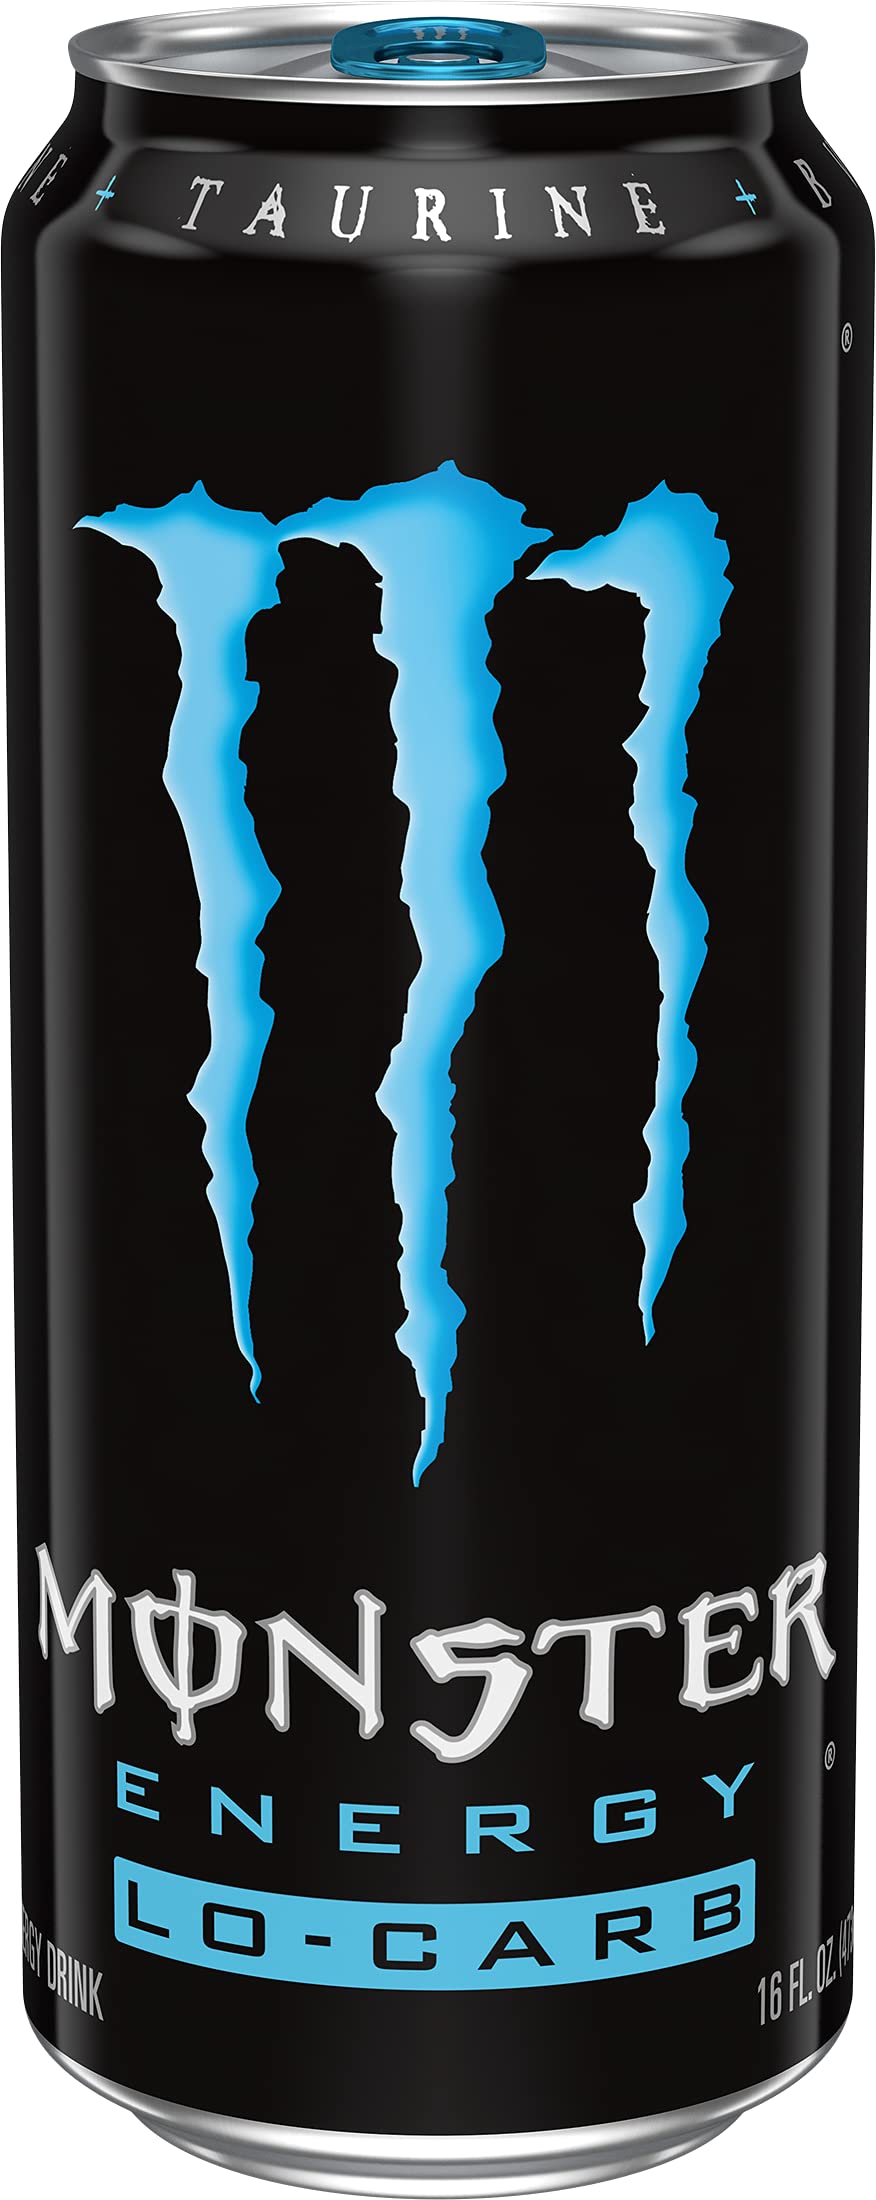 Monster Energy, Lo-Carb Monster, Low Carb Energy Drink, 16 Ounce (Pack of 24)